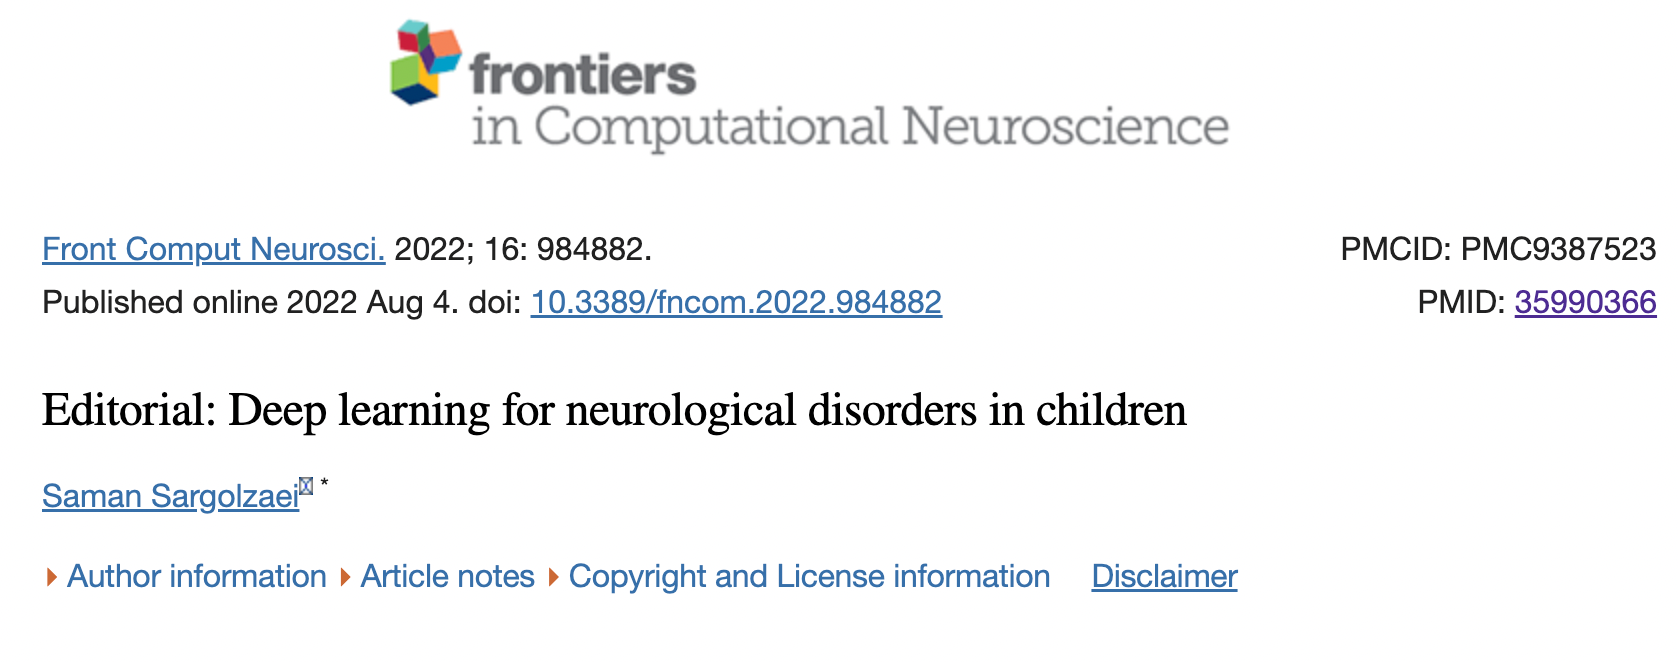 Our recent editorial article is published in Frontiers in Computational Neuroscience!